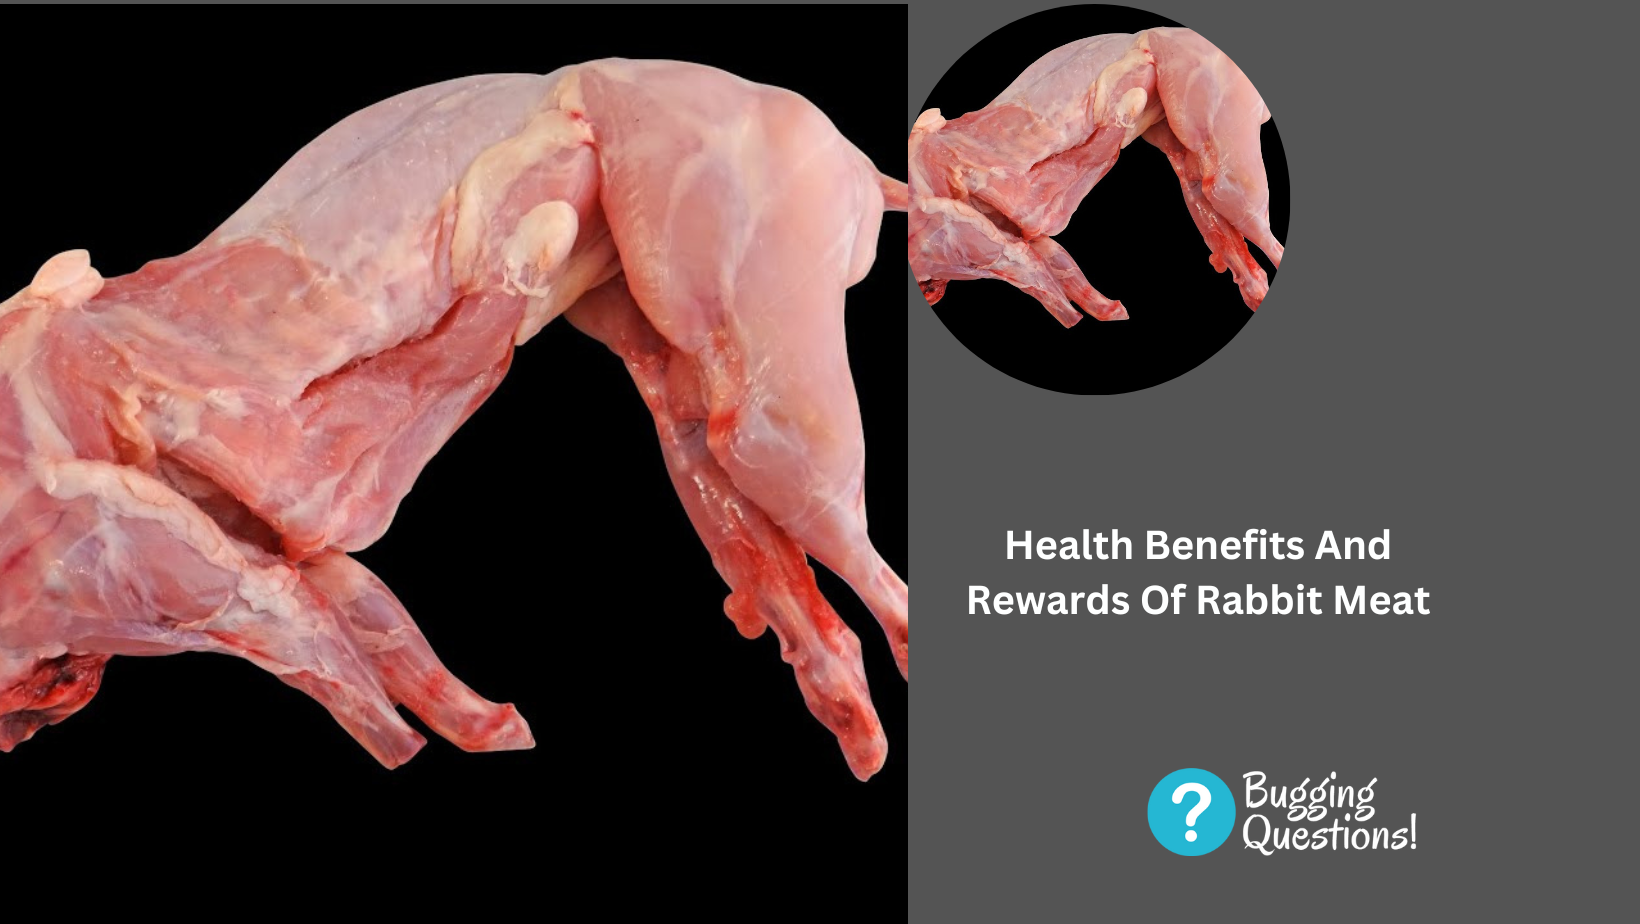 Health Benefits And Rewards Of Rabbit Meat